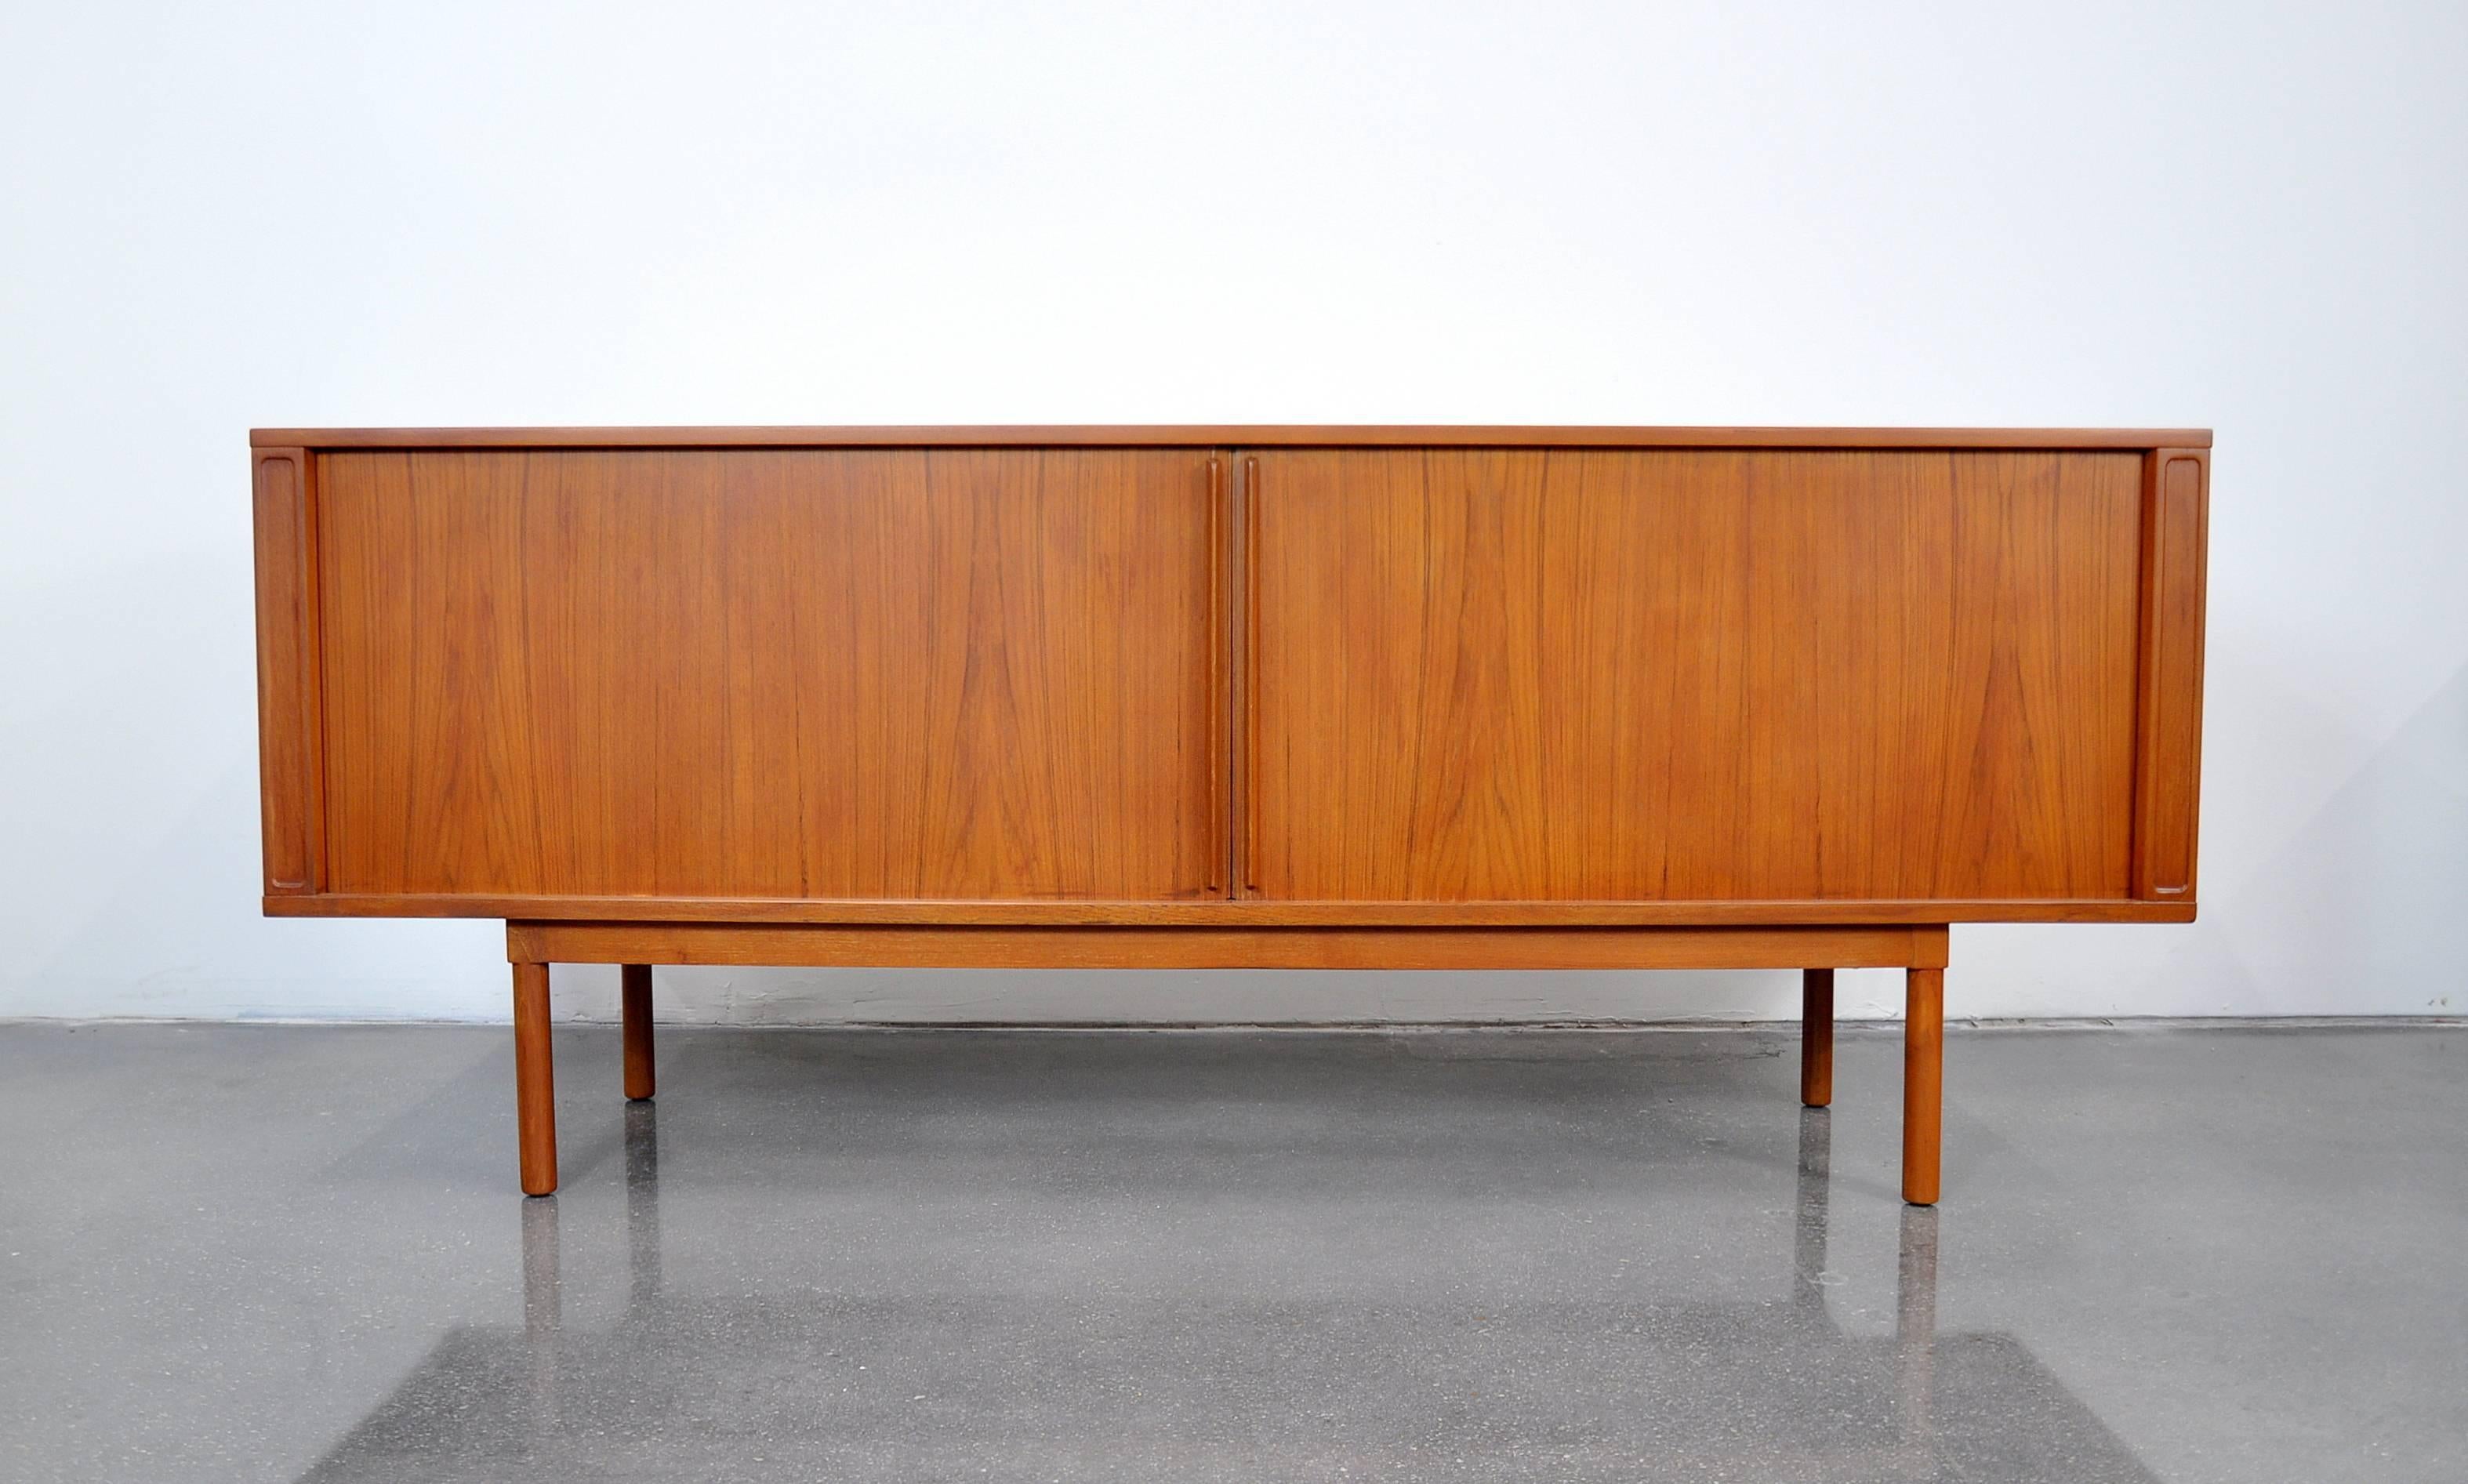 Beautiful Mid-Century Danish modern teak credenza or bar cabinet designed by Jens Quistgaard for Lovig; made in Denmark, circa 1971. The sideboard features two large tambour doors allowing unobstructed access to the interior. Each door is